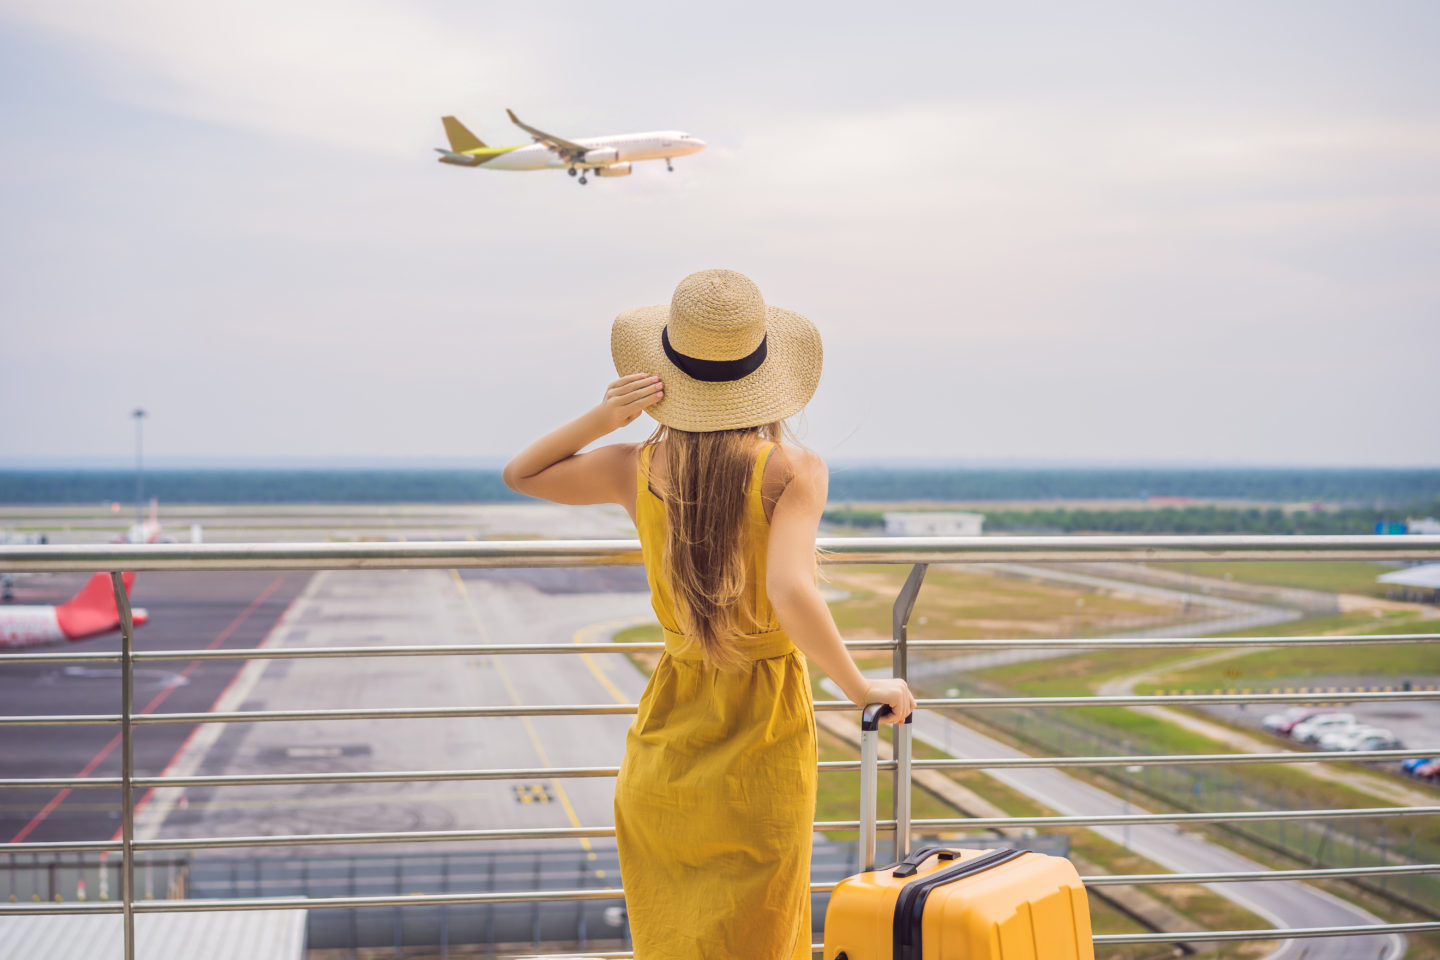 How To Look Good After A Long Flight: Top 10 Travel Beauty Hacks